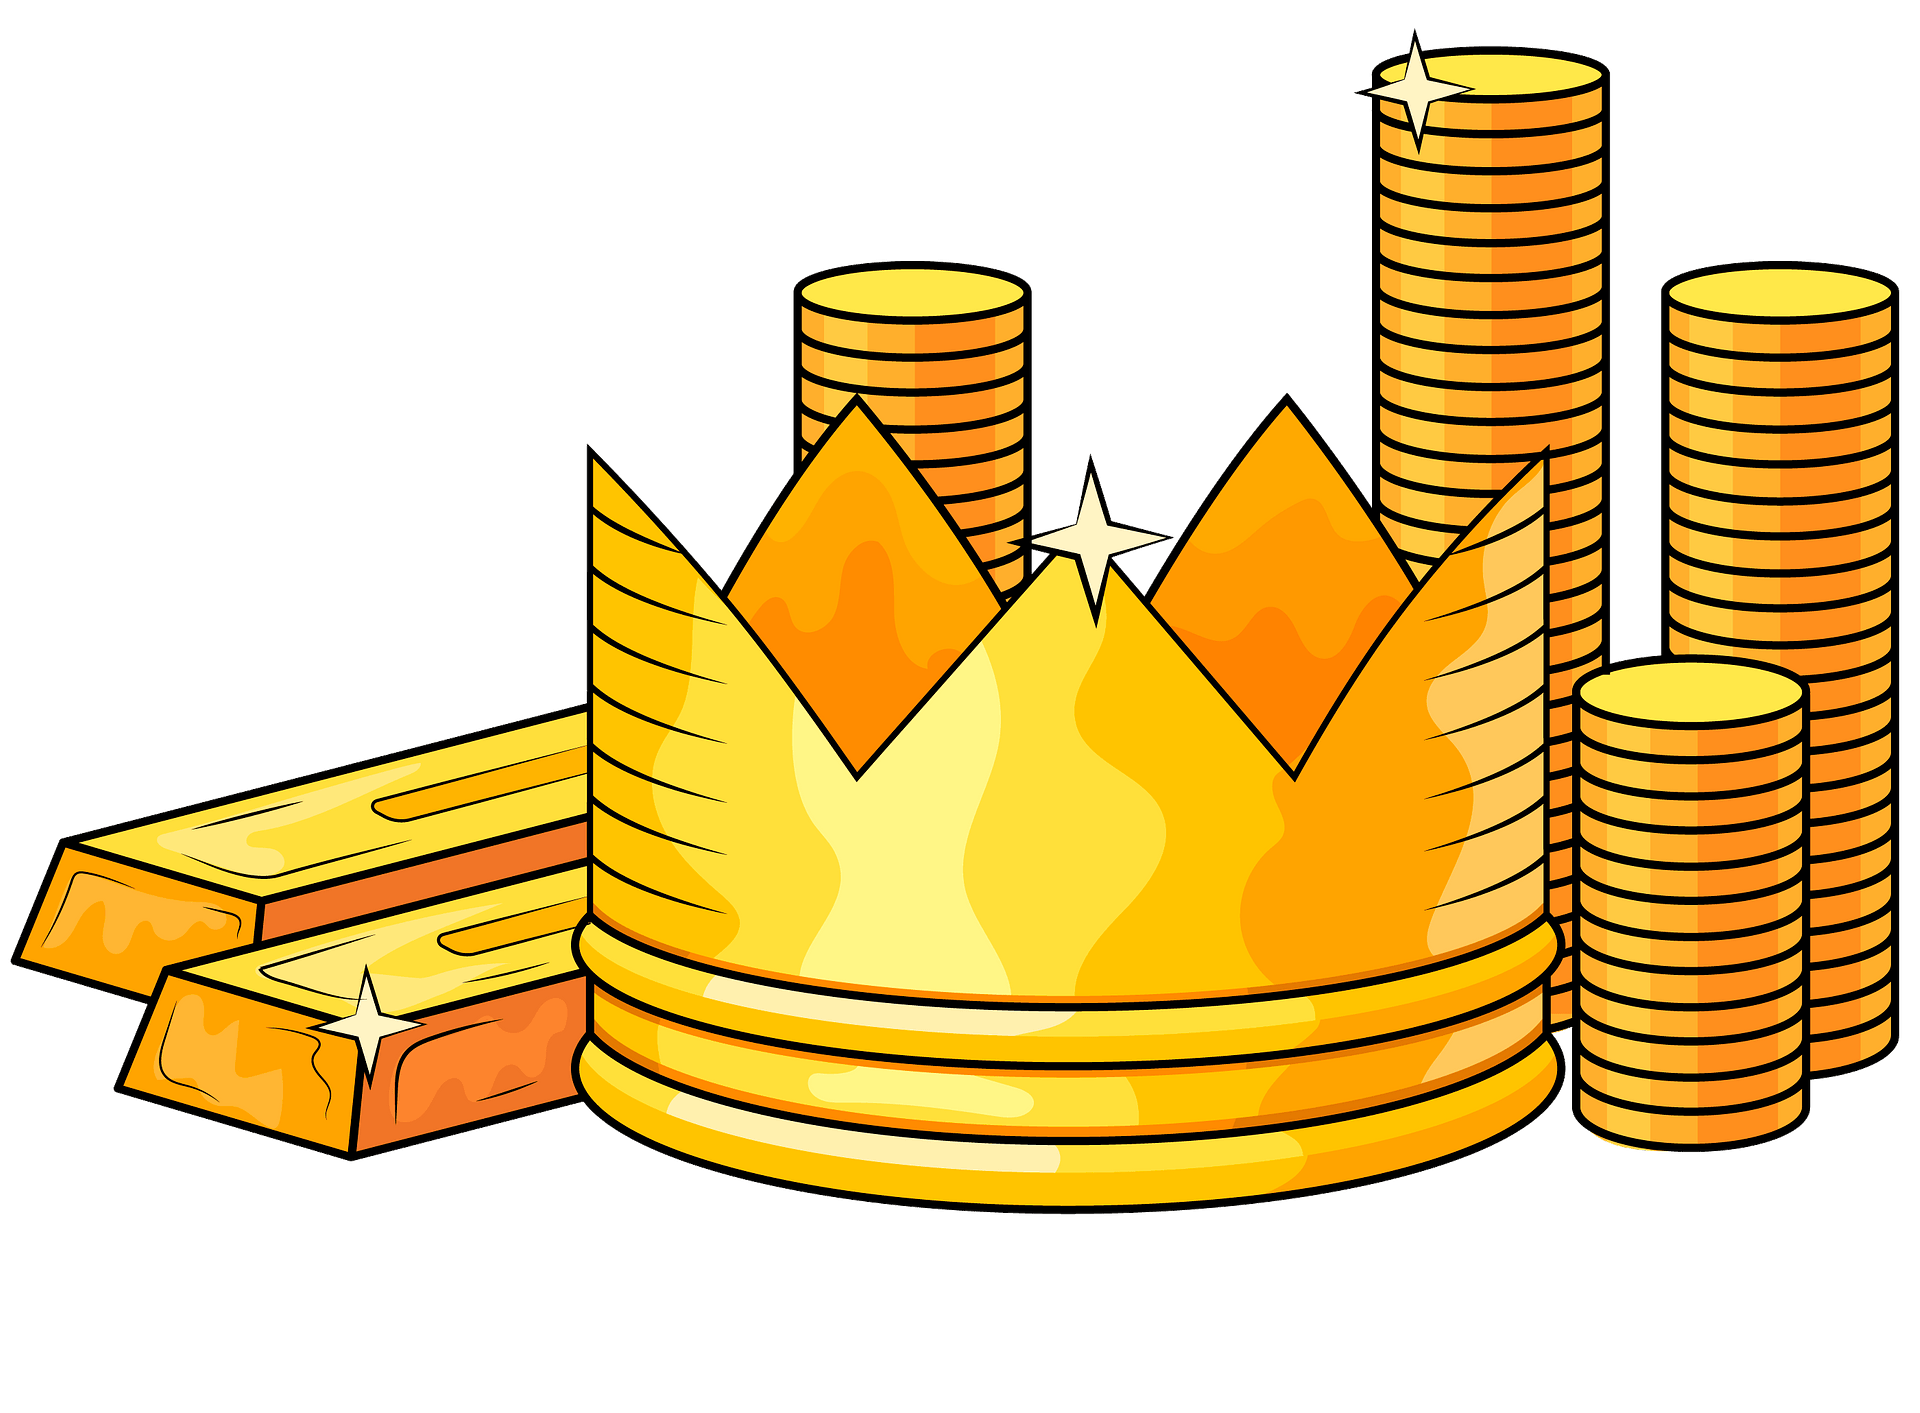  featuring a gold crown, gold coins, and gold bars all together. Cliparts printable PDF